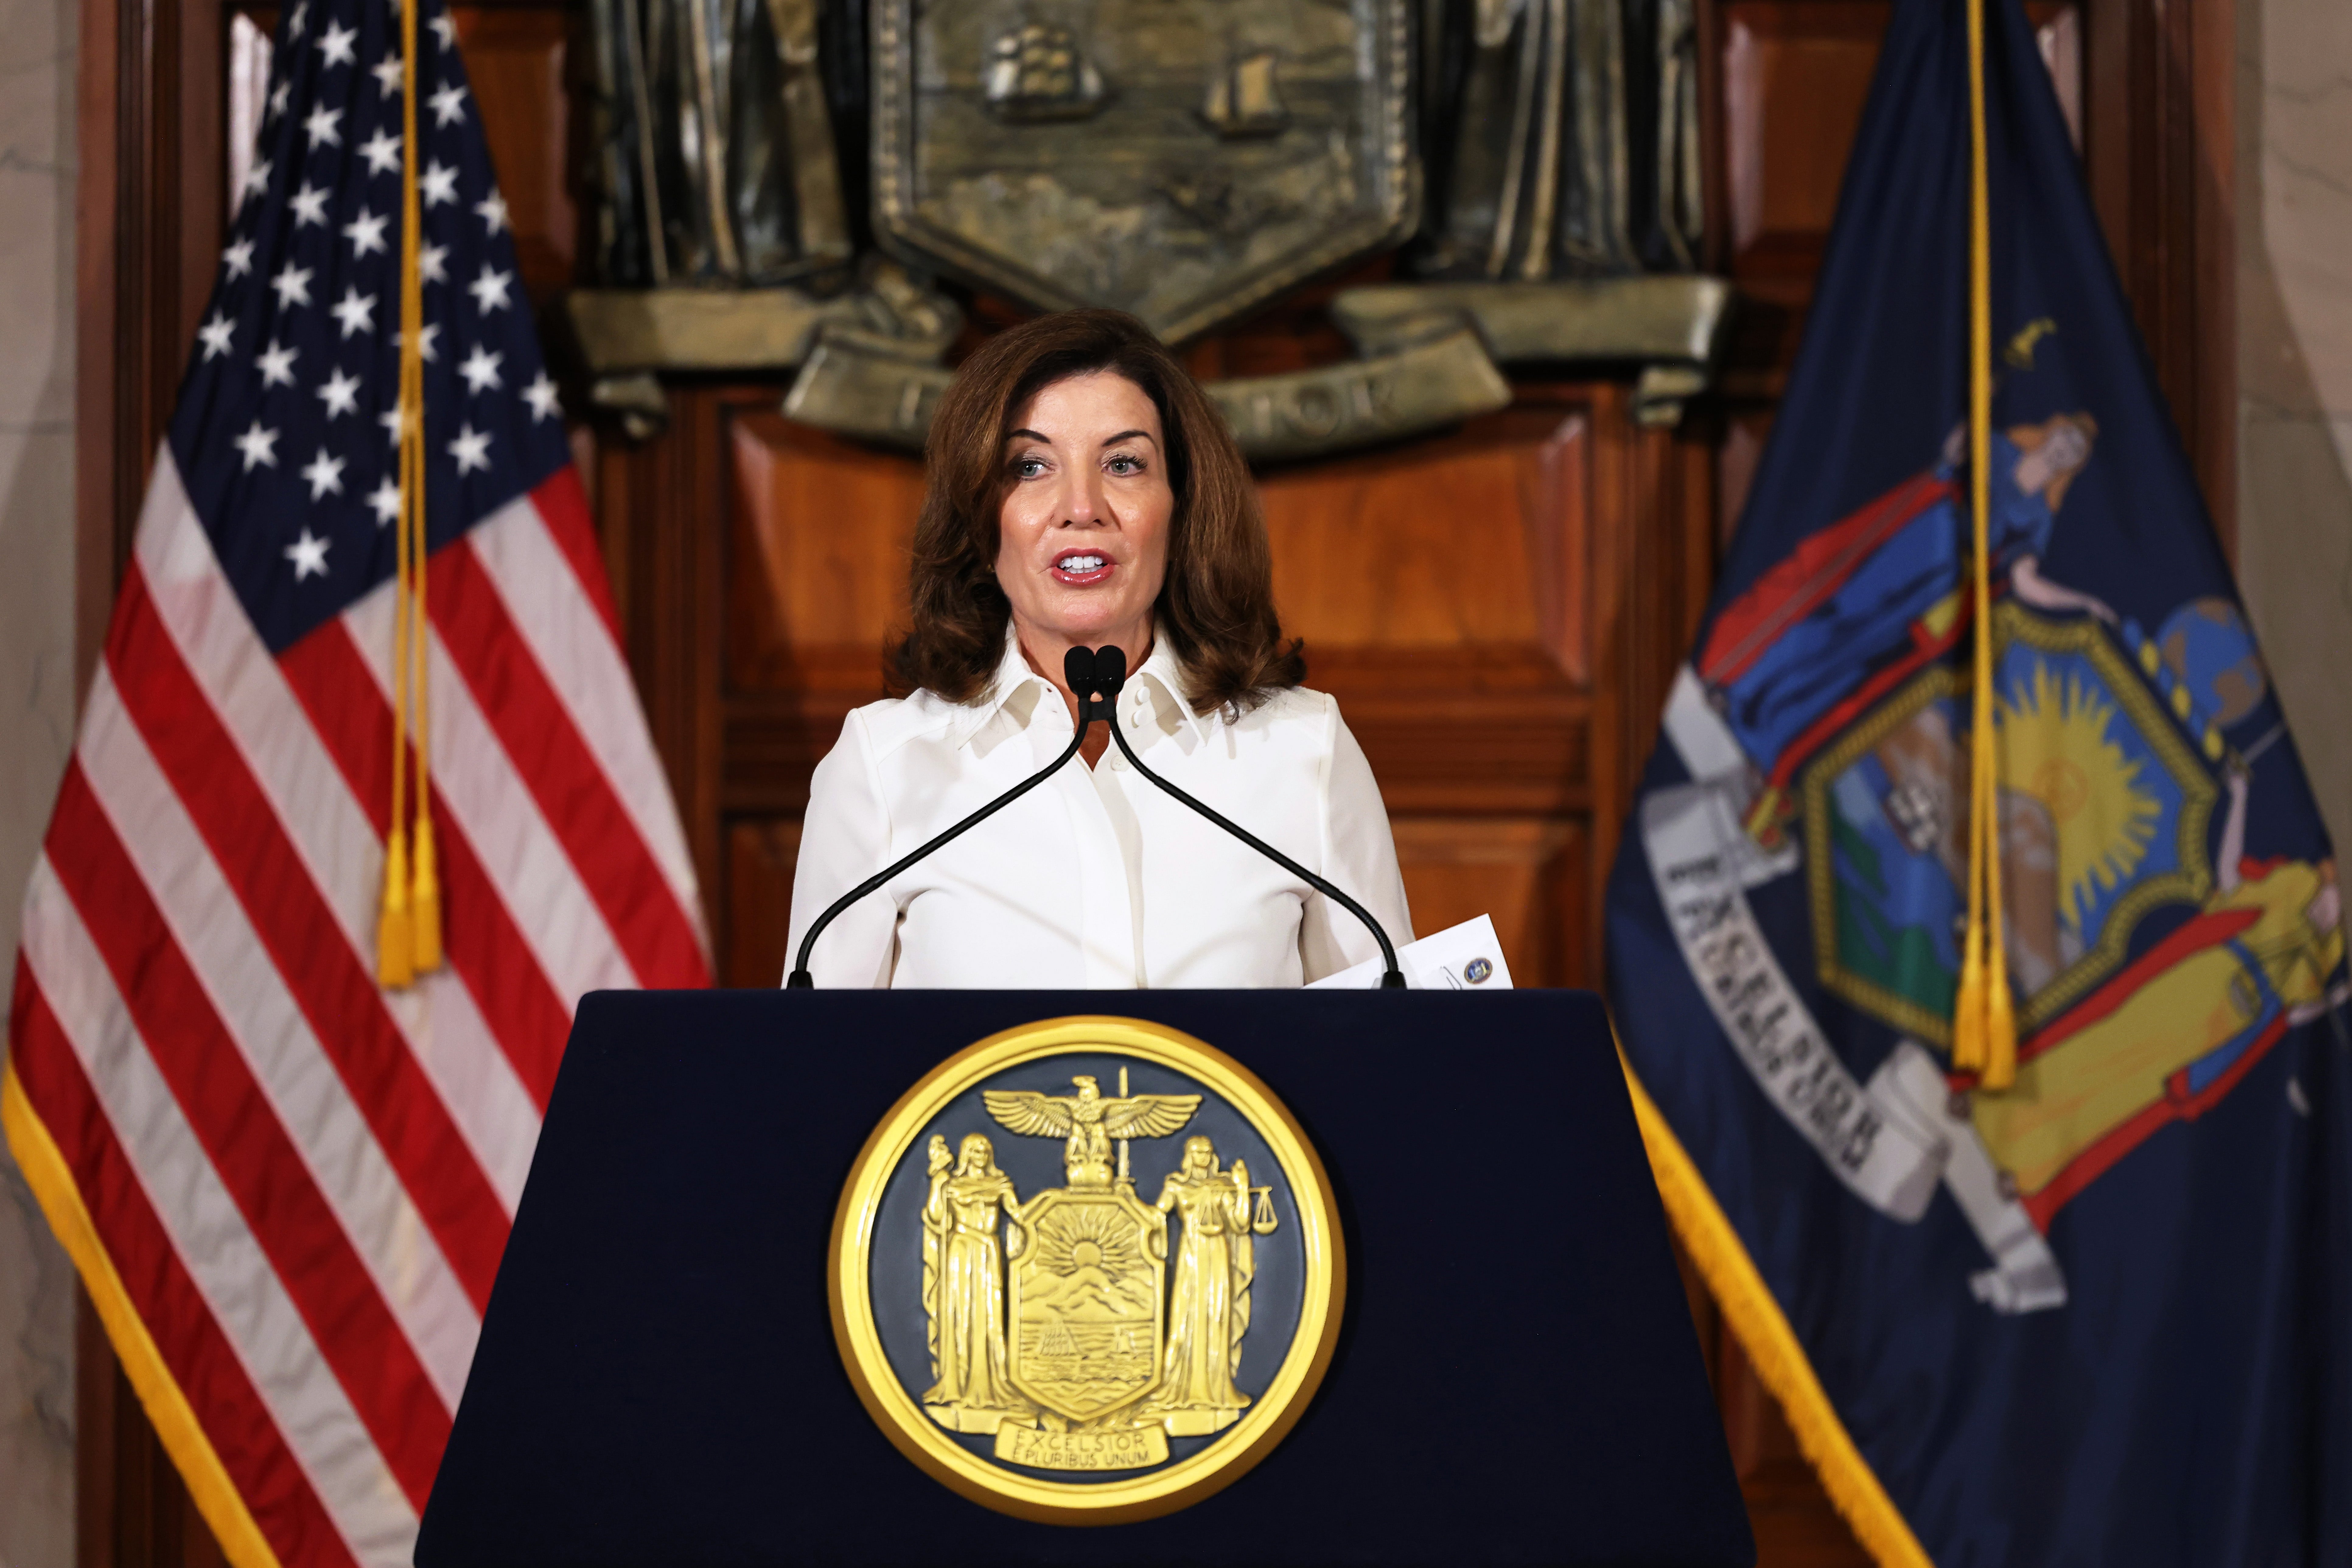 New York governor Kathy Hochul speaks after taking her ceremonial oath of office at the New York State Capitol on 24 August 2021 in Albany, New York